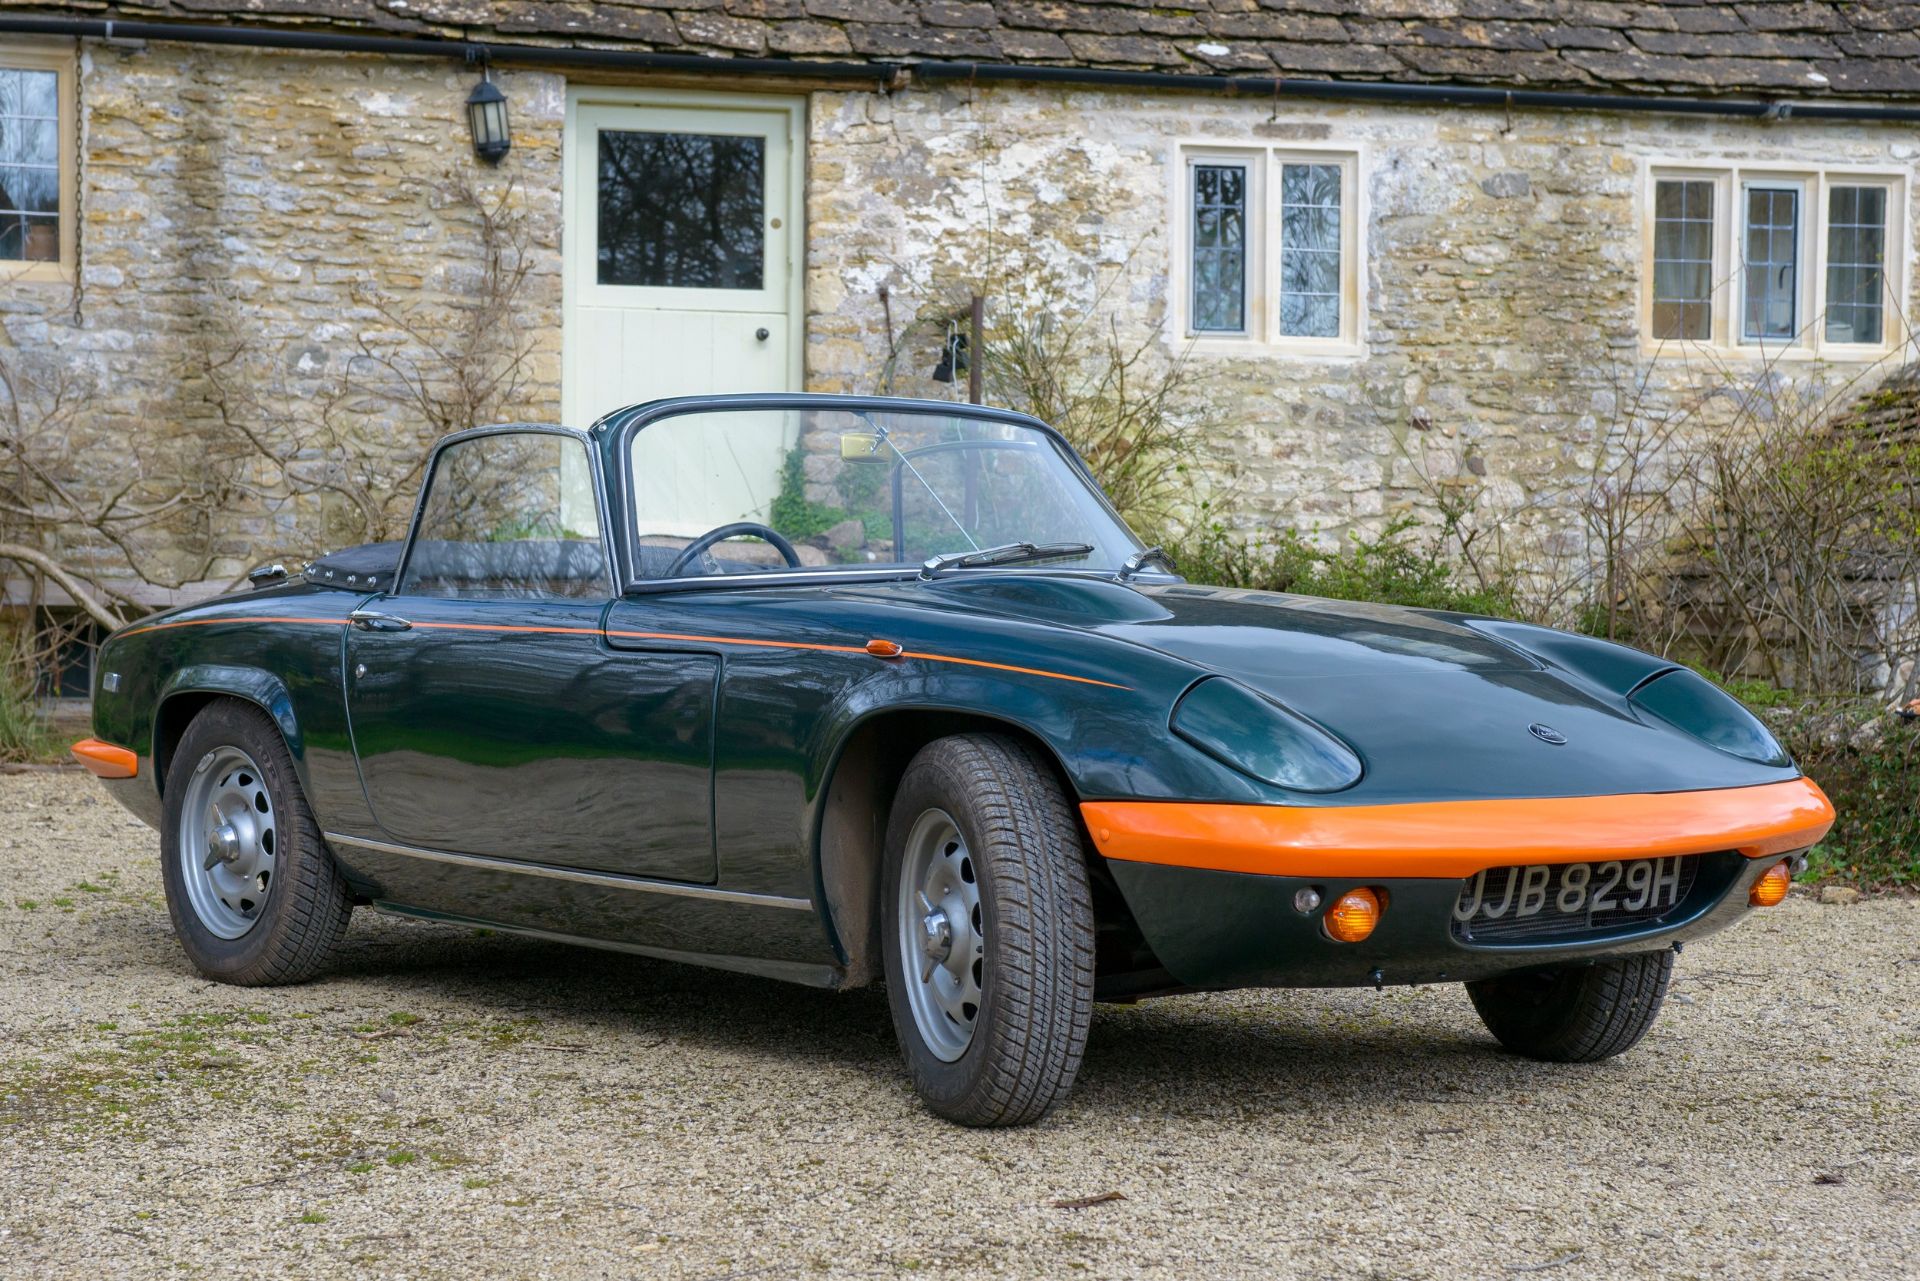 1969 LOTUS ELAN SERIES 4 BRM DROPHEAD COUPE Chassis Number: 45/9498 Registration Number: UJB 829H - Image 8 of 33